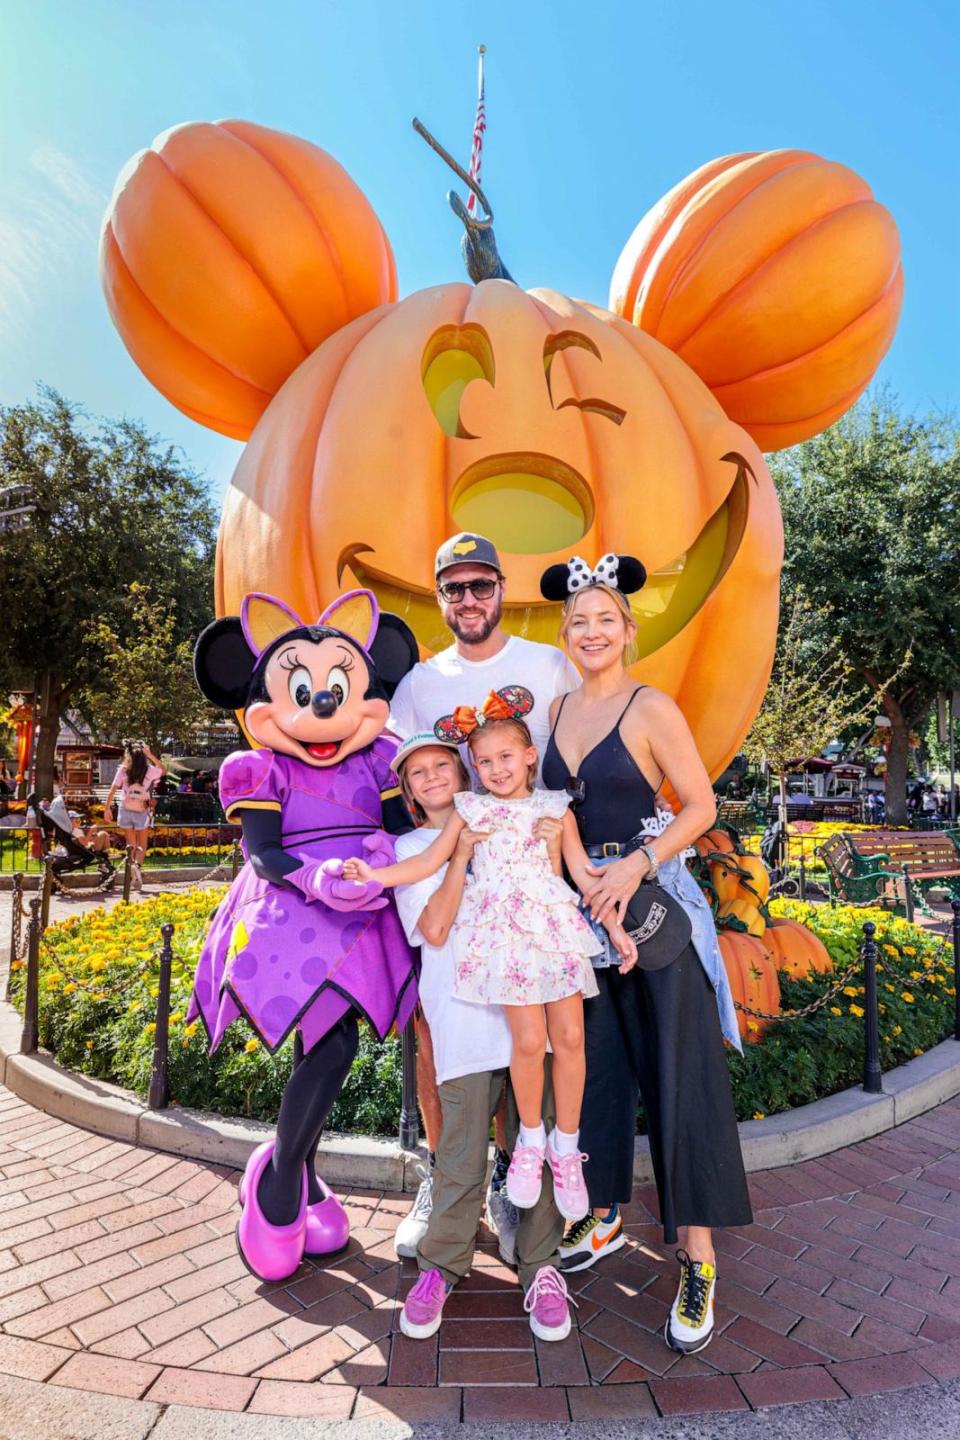 PHOTO: In this handout image provided by Disneyland Resort, actress Kate Hudson and her family celebrate her daughter Rani Rose's birthday with Minnie Mouse during Halloween Time at Disneyland Park on Sept. 26, 2022 in Anaheim, Calif. (Handout/Disneyland Resort via Getty Images)